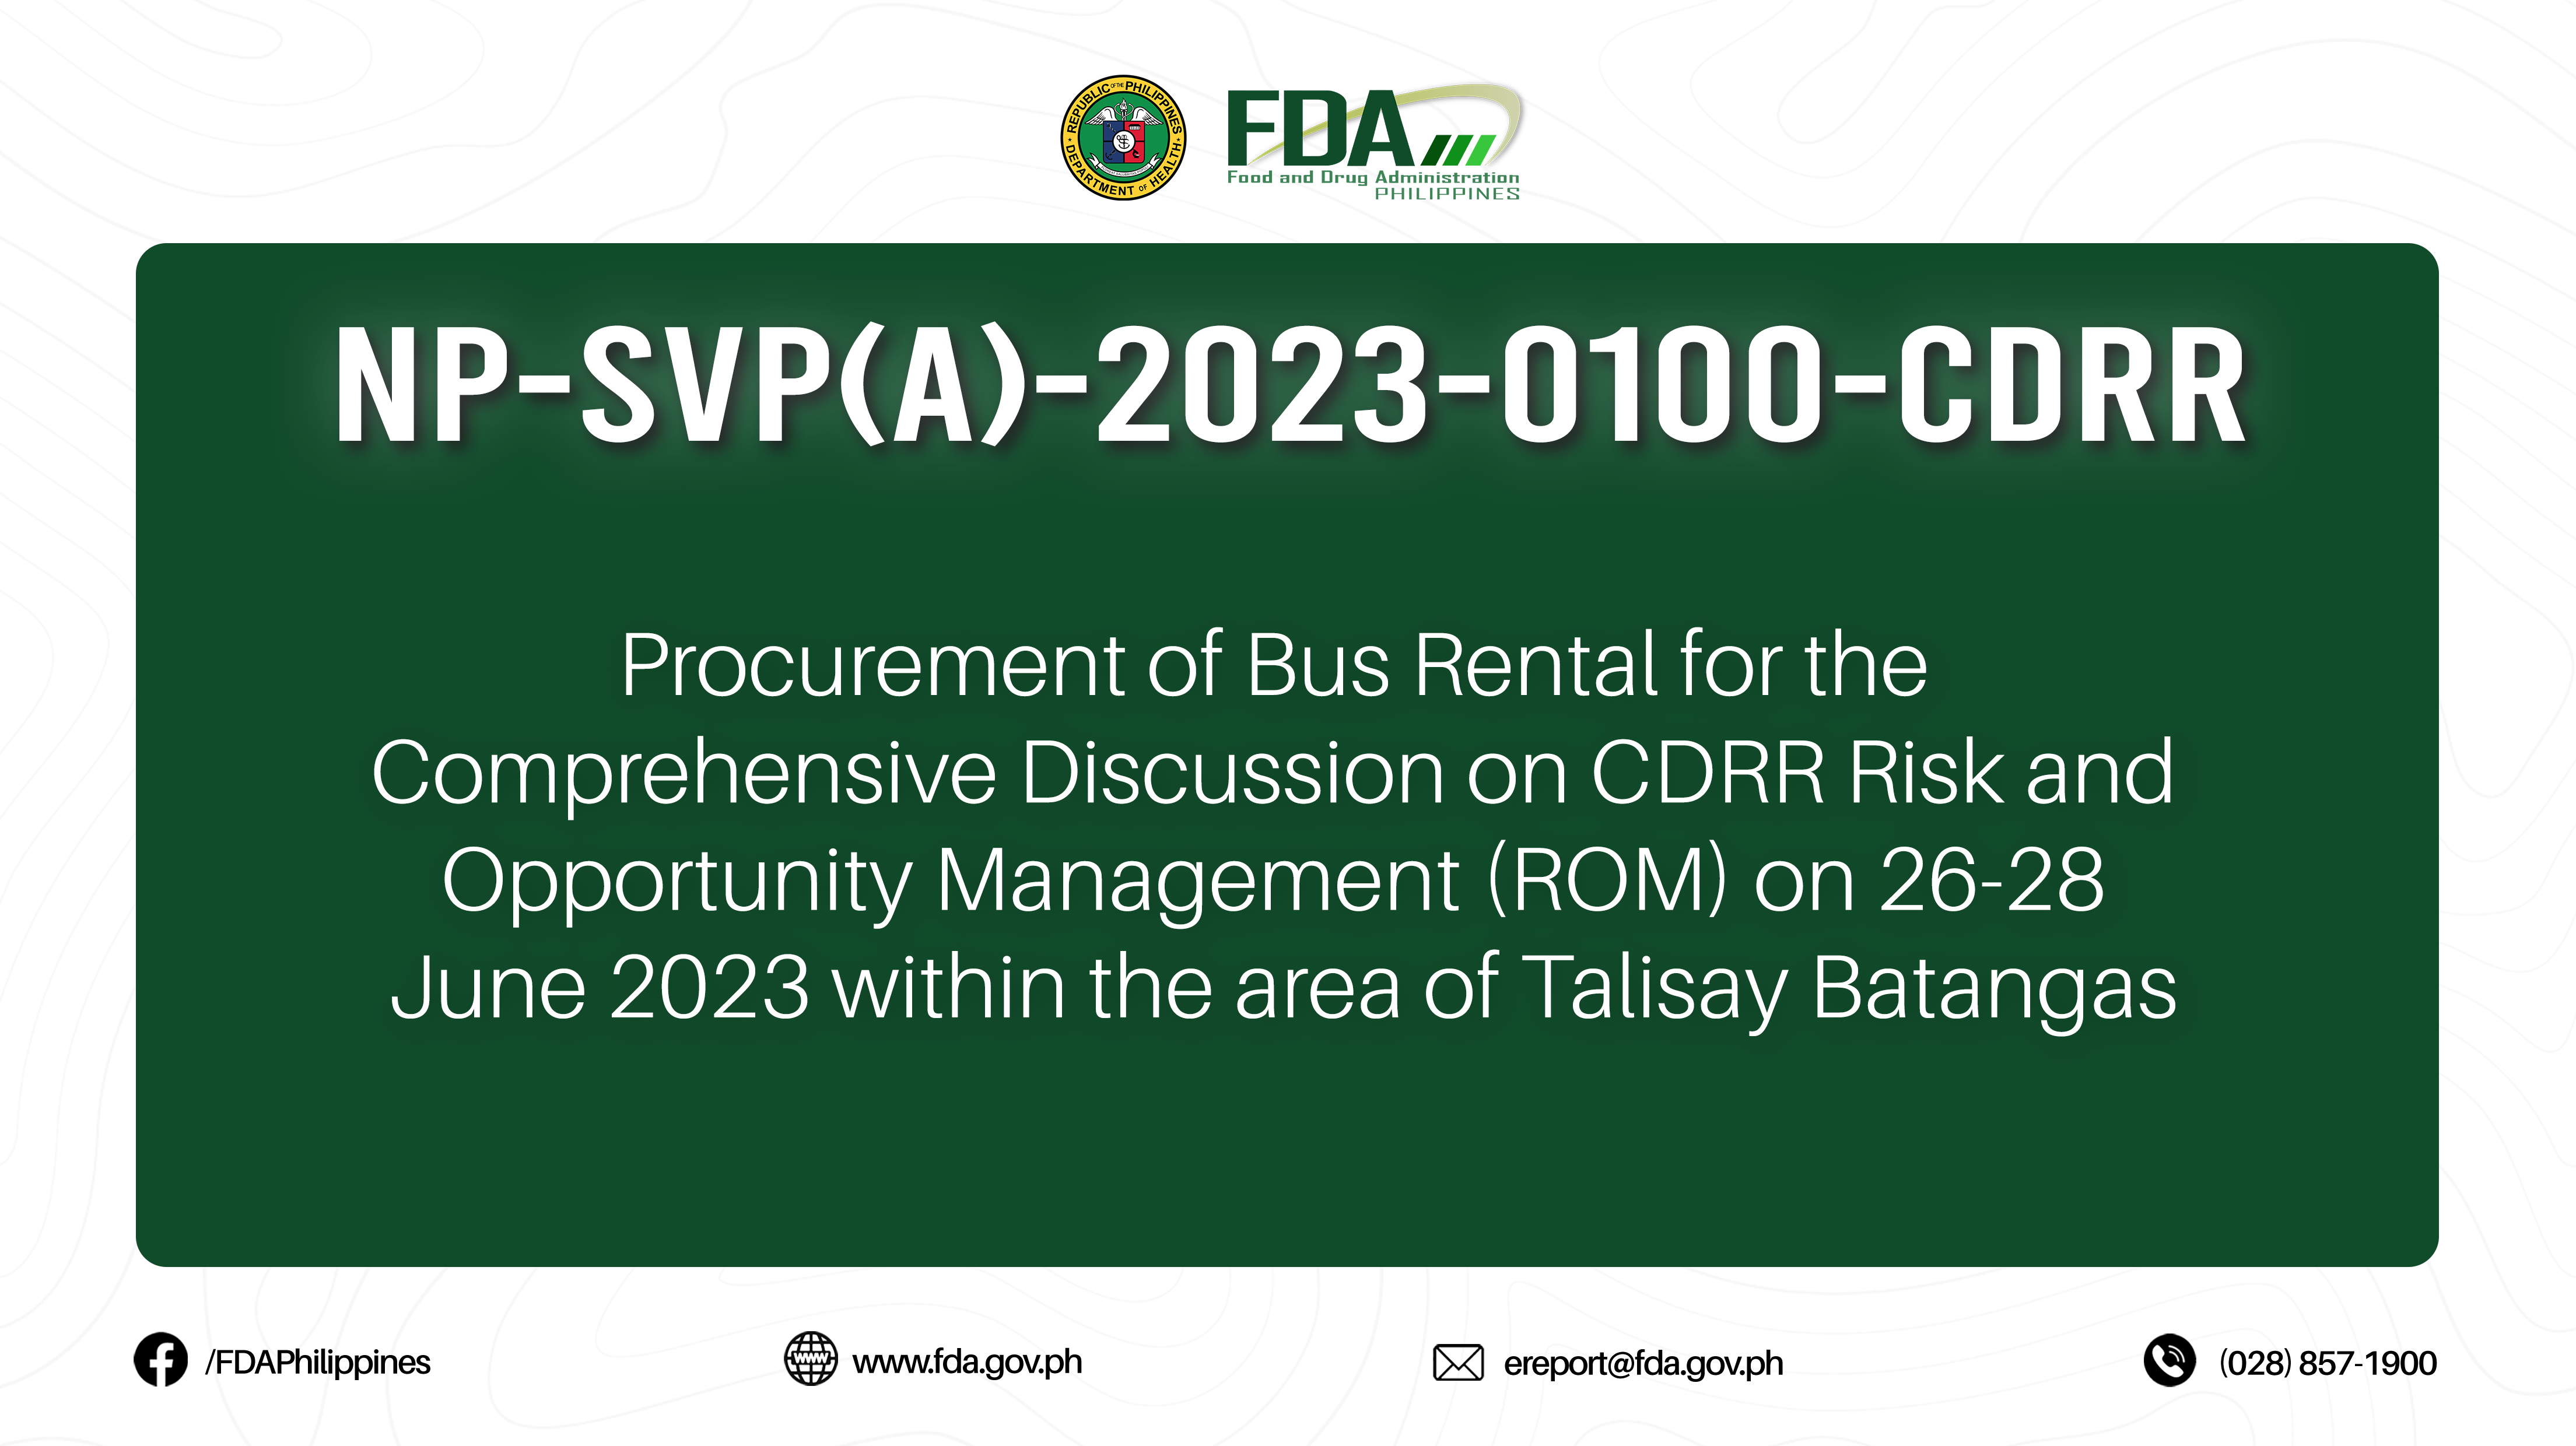 NP-SVP(A)-2023-0100-CDRR || Procurement of Bus Rental for the Comprehensive Discussion on CDRR Risk and Opportunity Management (ROM) on 26-28 June 2023 within the area of Talisay Batangas